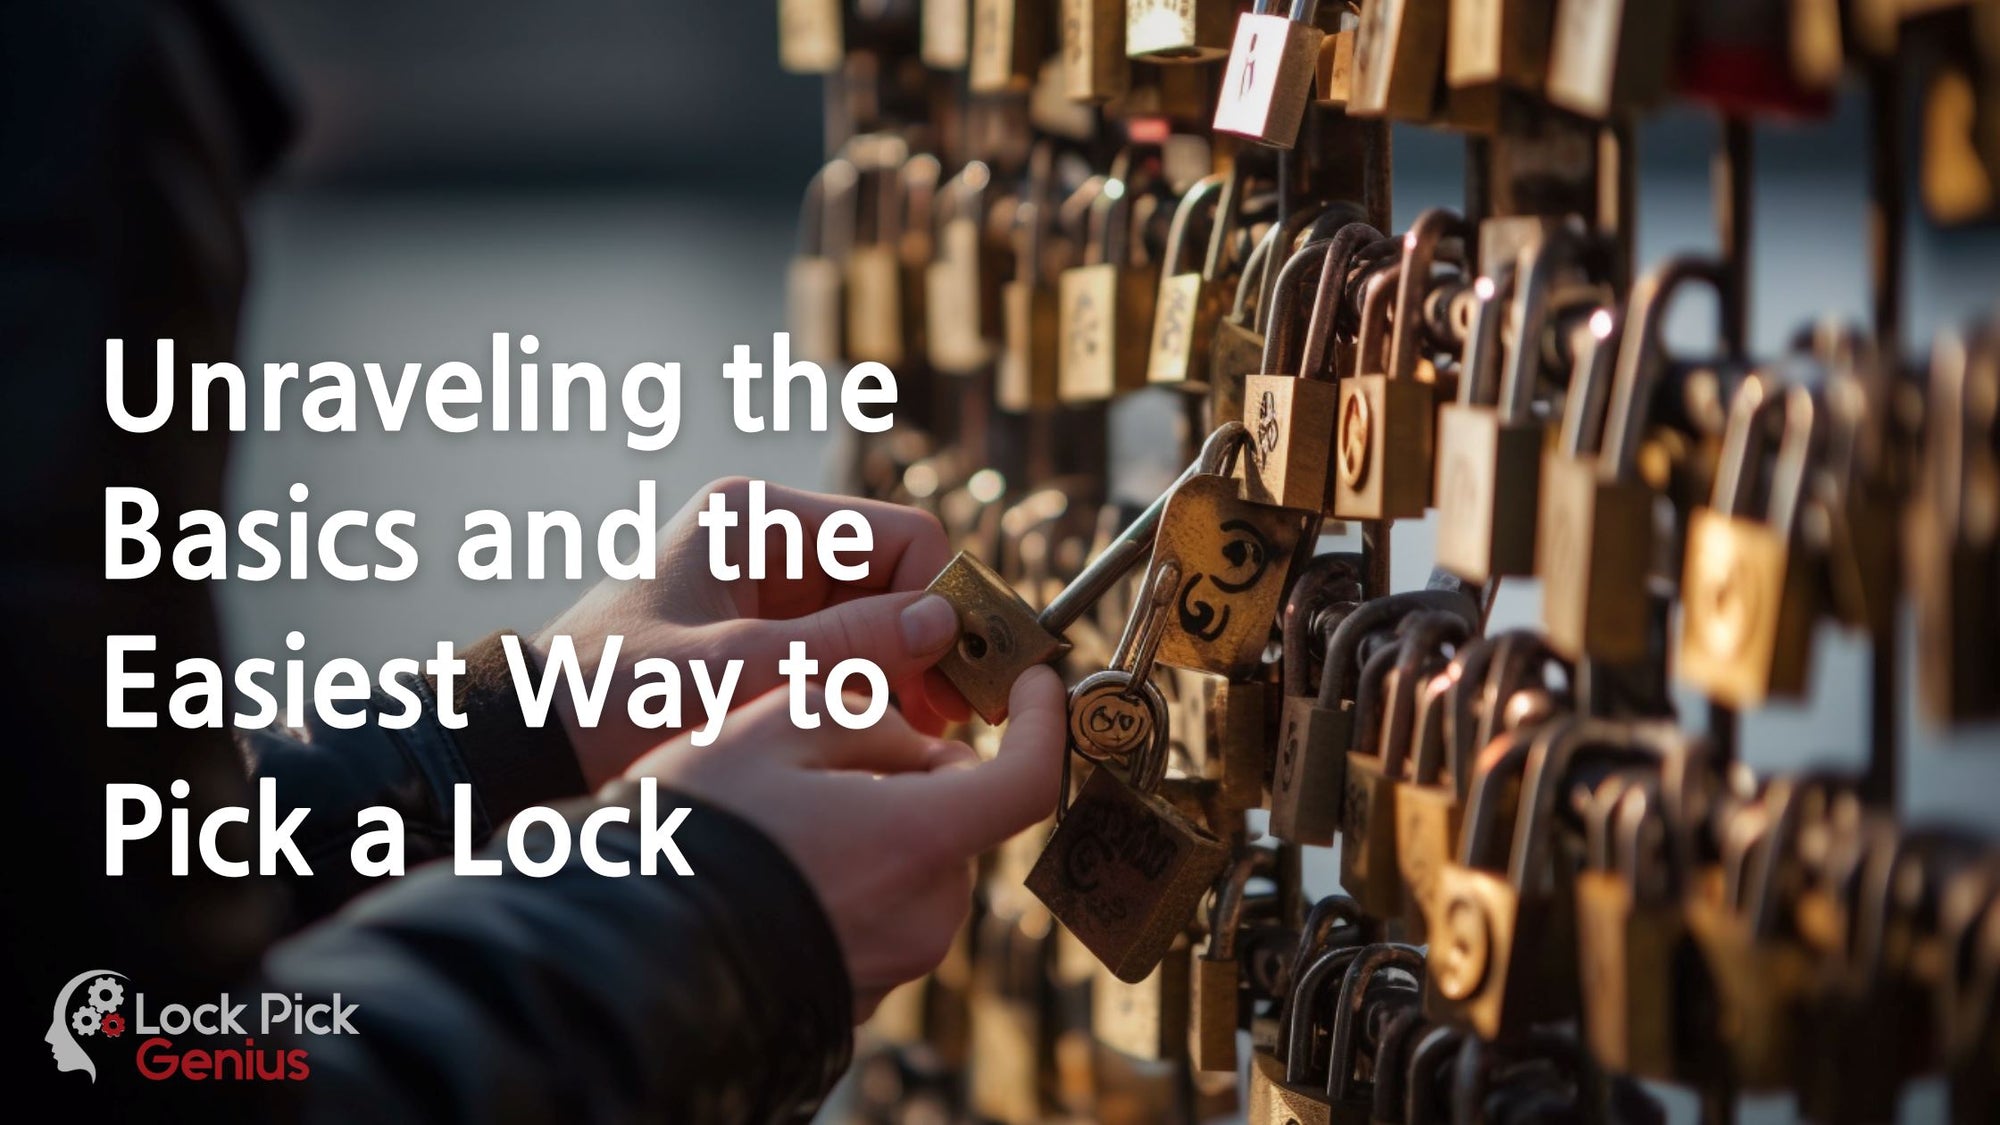 Unraveling the Basics and the Easiest Way to Pick a Lock